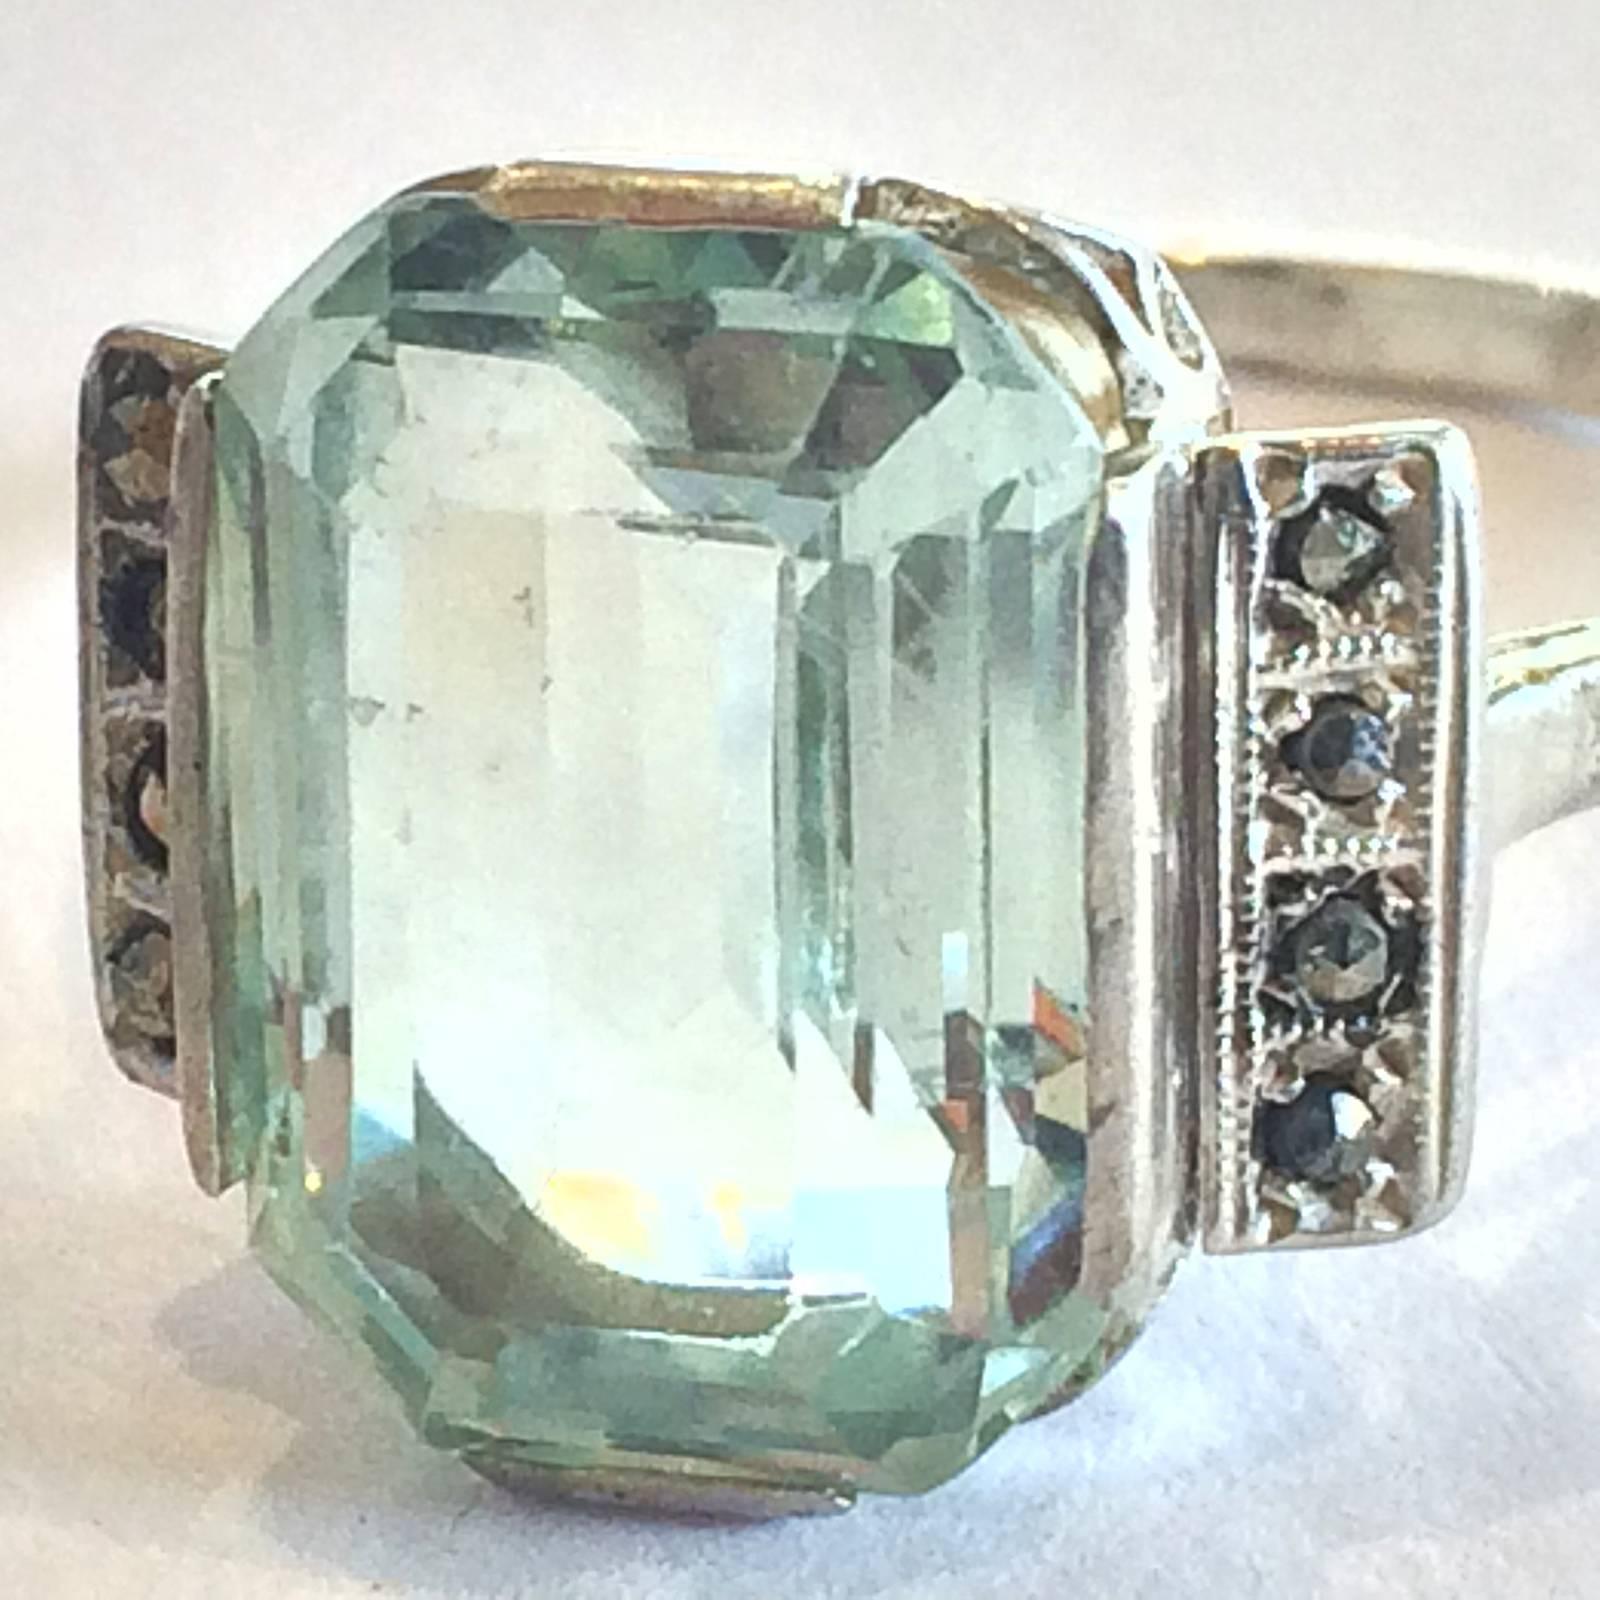 Art Deco Ring, Silver Marcasite with fantastic, large Baguette cut Aquamarine, all in amazing original condition. The stone is high set to get light under the setting to show the Aquamarine colour. No Hallmark but tested as “925” European Silver.